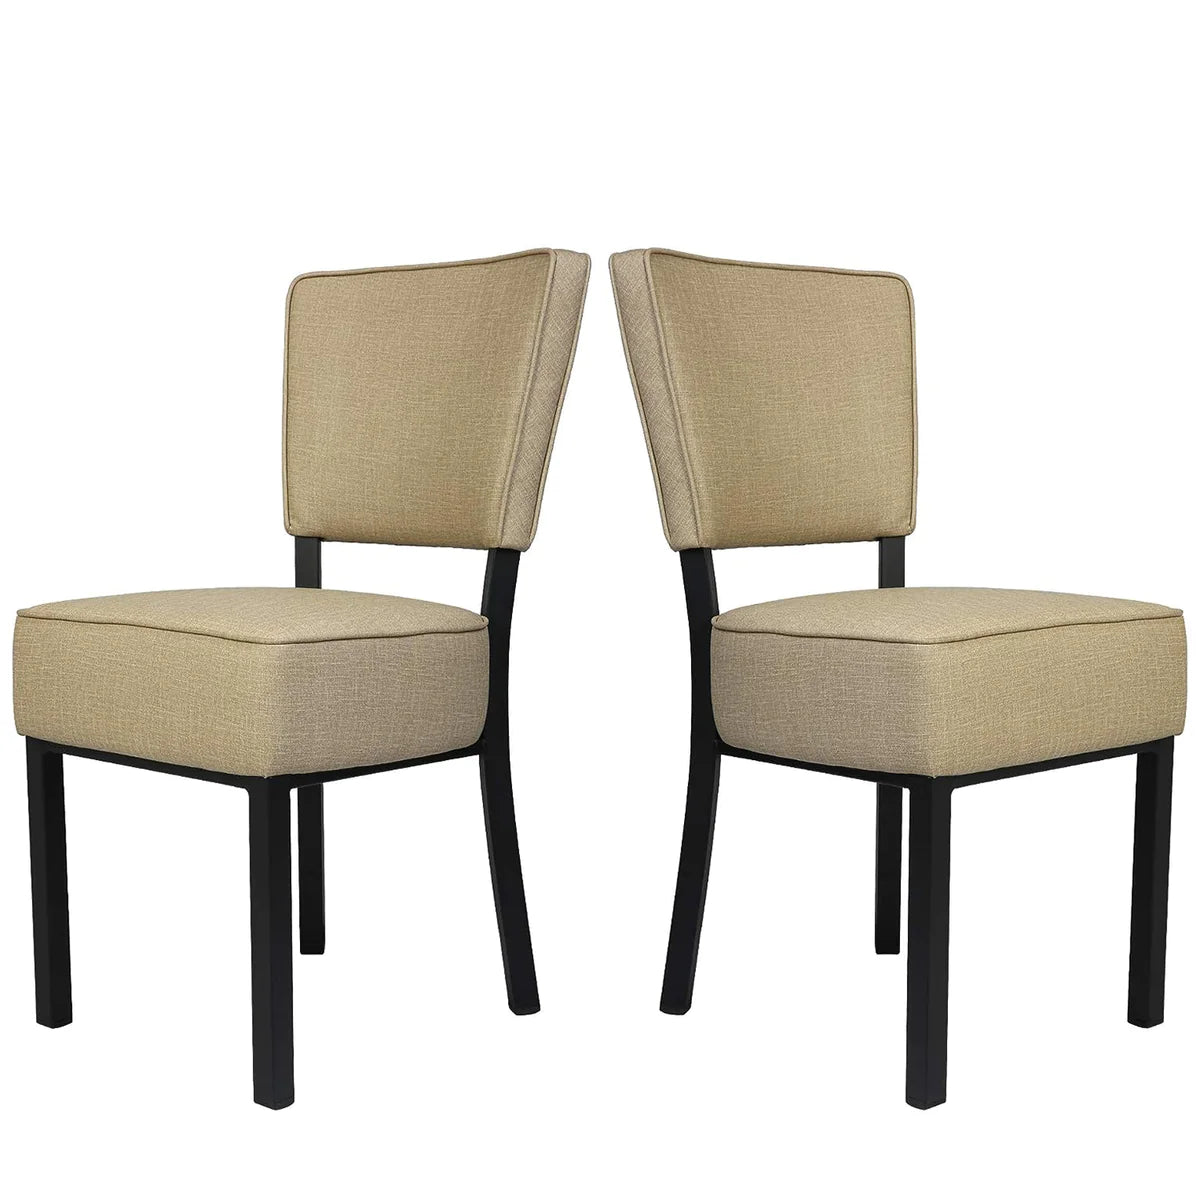 2 Set of  Leather Side Chairs Kitchen Dining Chairs with Upholstered and Backrest, Multiple colors